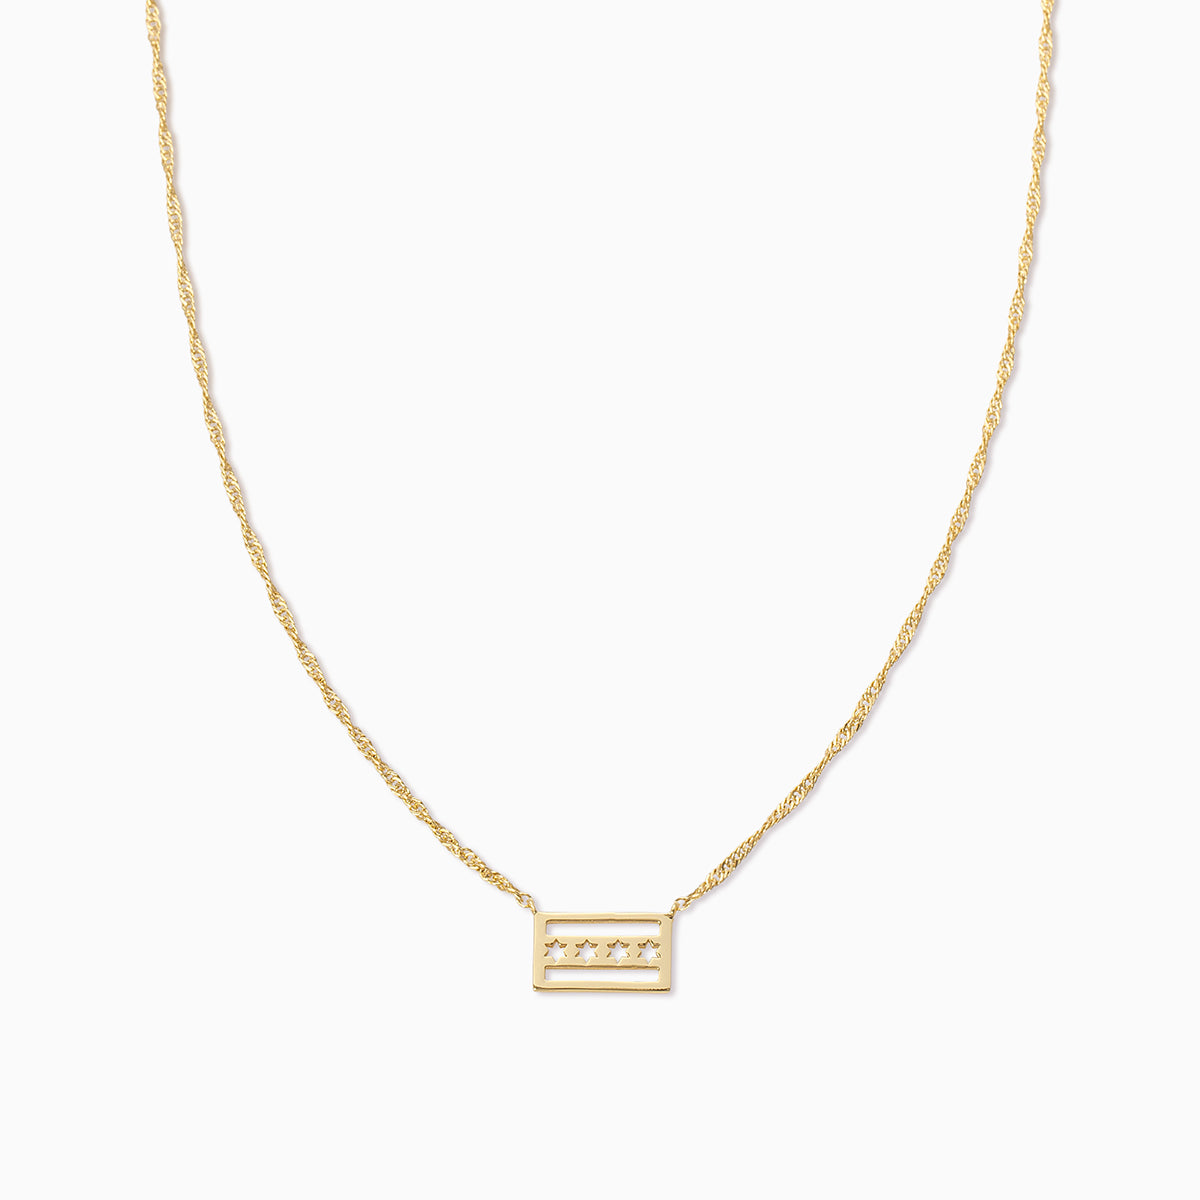 Chicago Flag Pendant Necklace | Gold | Product Image | Uncommon James